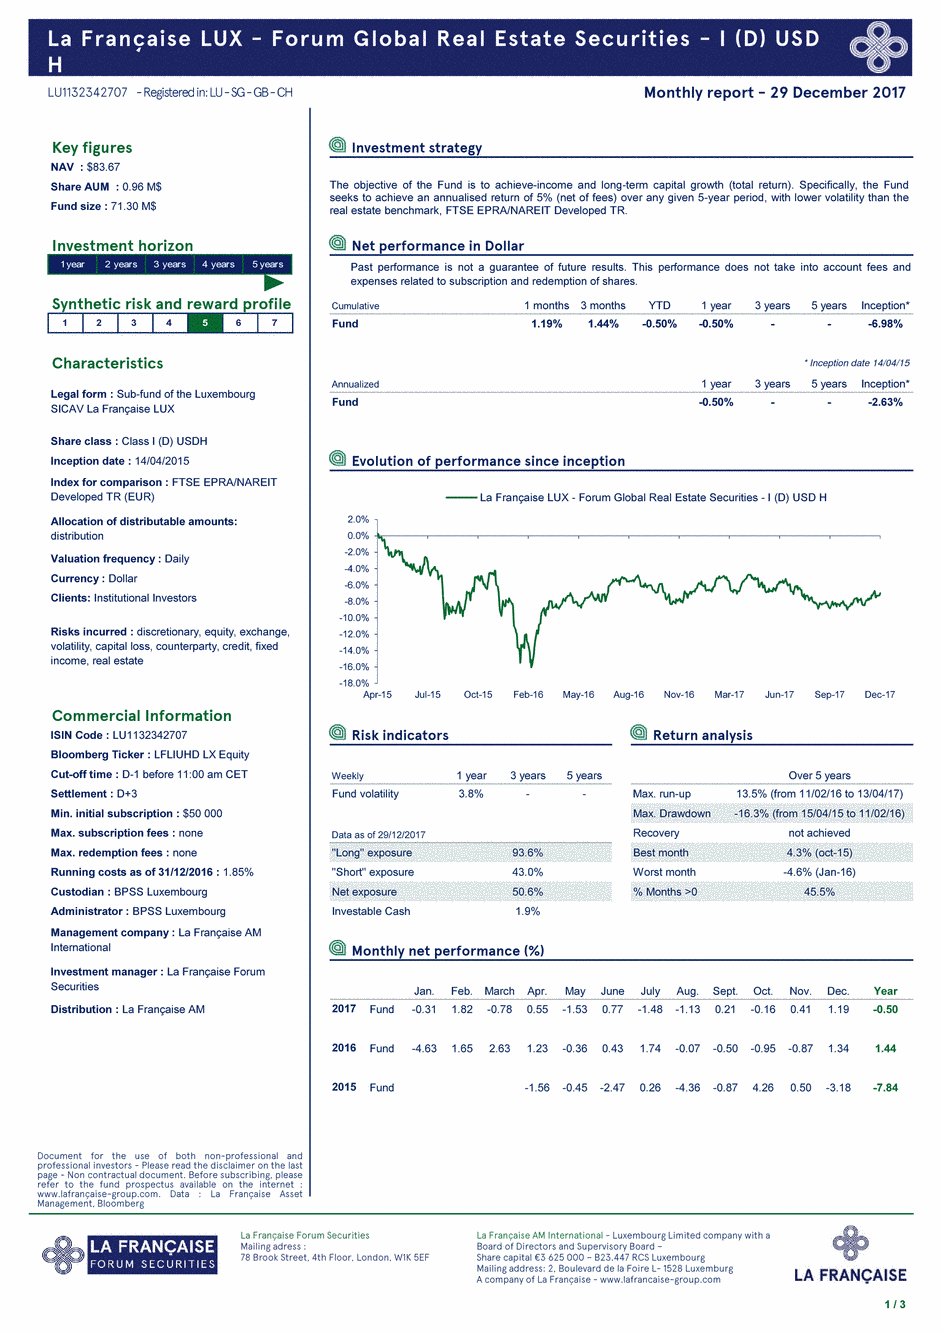 Reporting La Française LUX - Forum Global Real Estate Securities - I (D) USD H - 31/12/2017 - Anglais